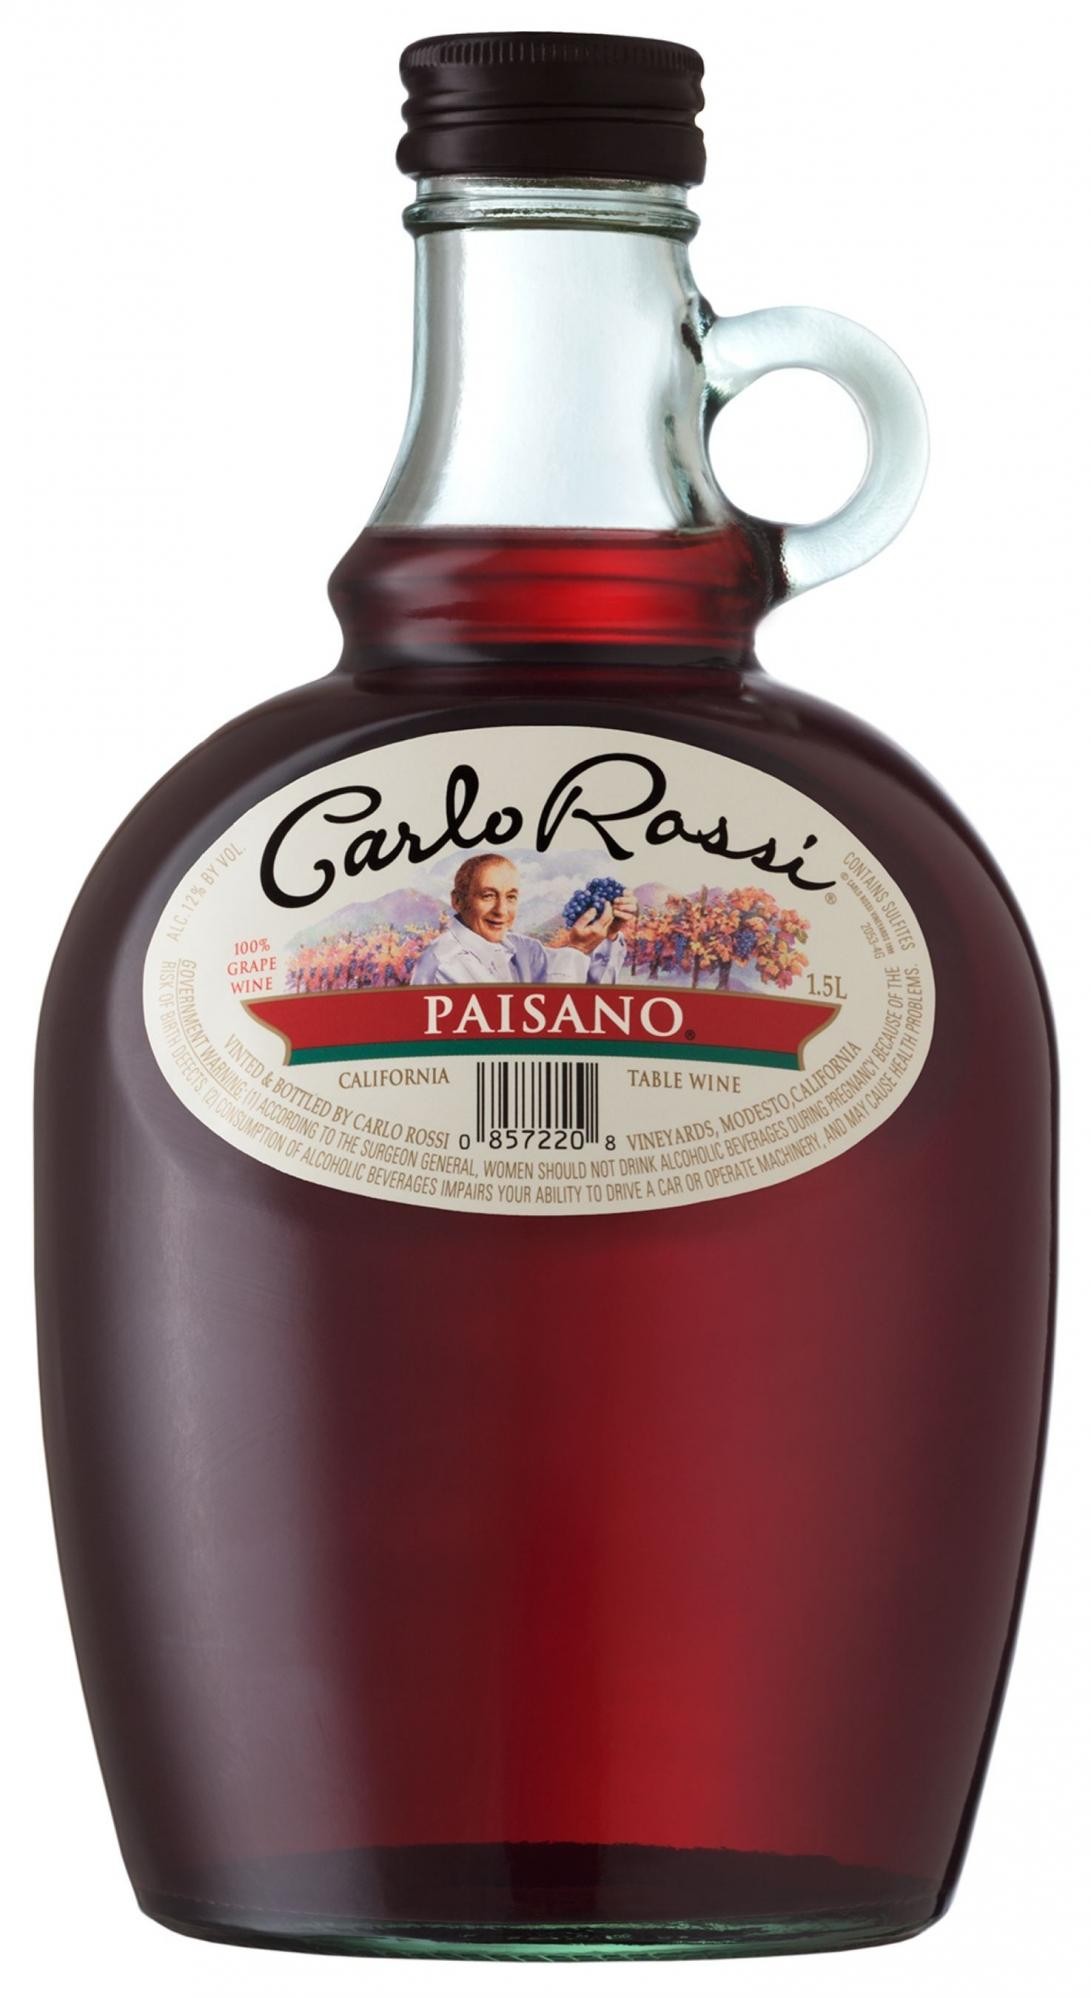 Carlo Rossi Paisano Pais - Red Wine from California - 4L Bottle